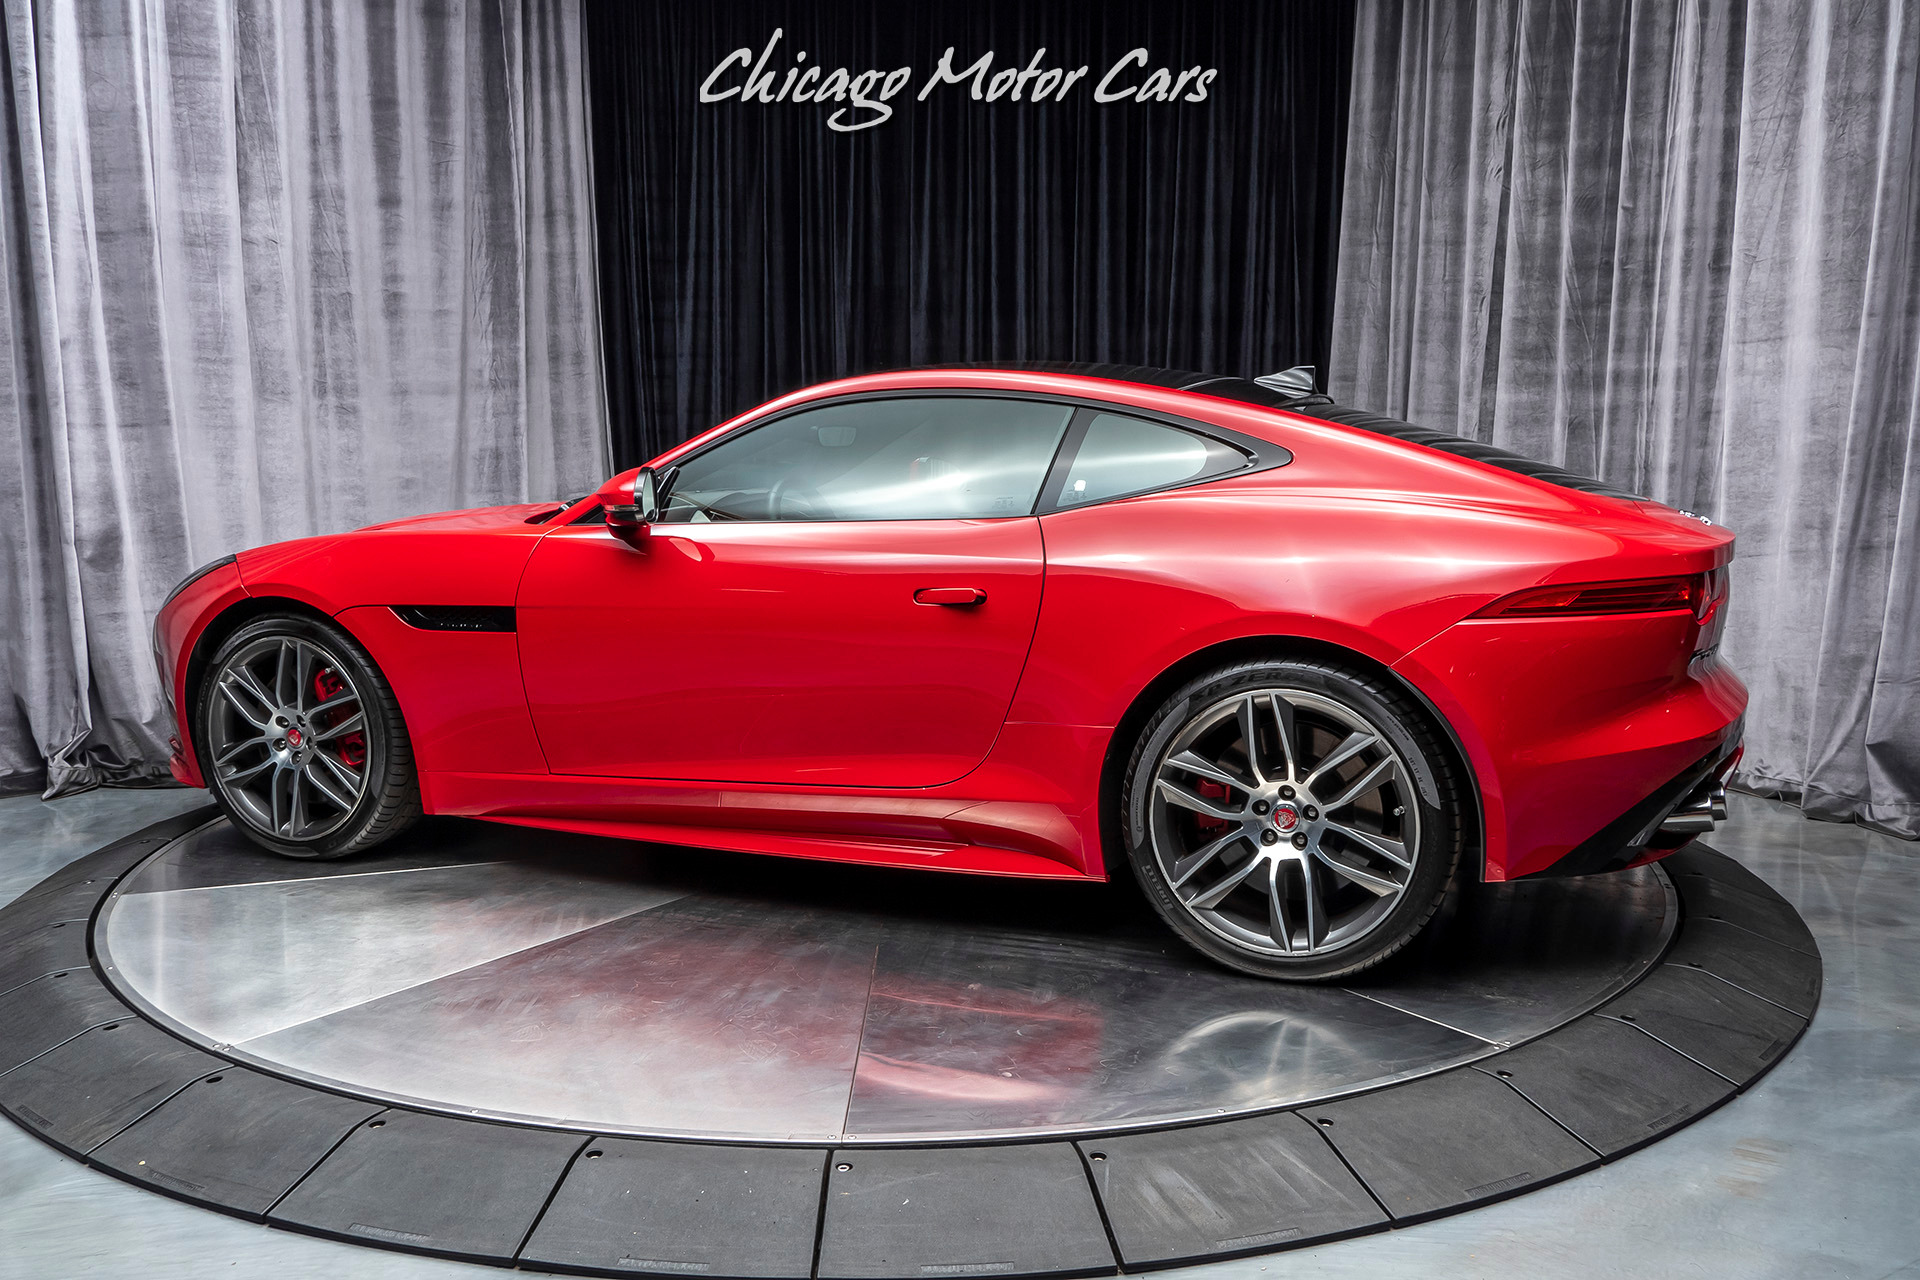 Used 2017 Jaguar F-TYPE R AWD Coupe VISION & BLACK PACKAGE ...